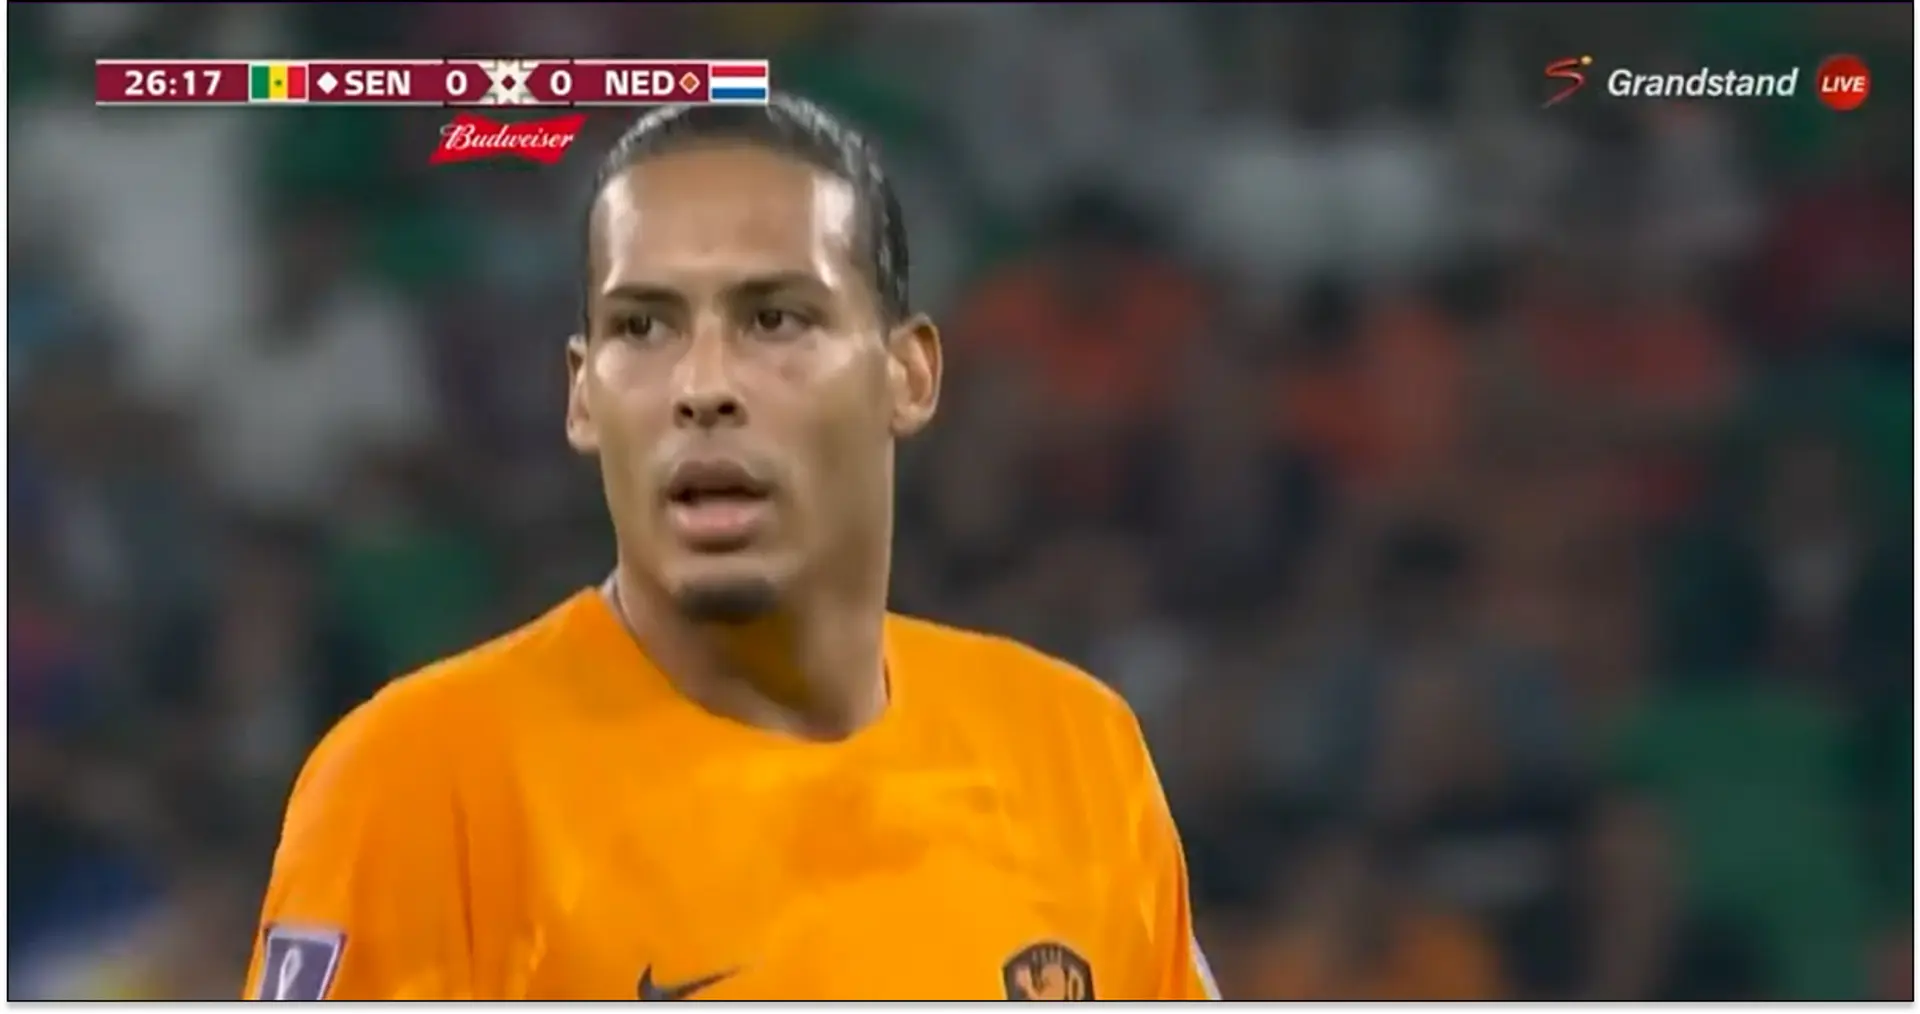 How did Van Dijk fare in Netherlands' win v Senegal at World Cup? Answered